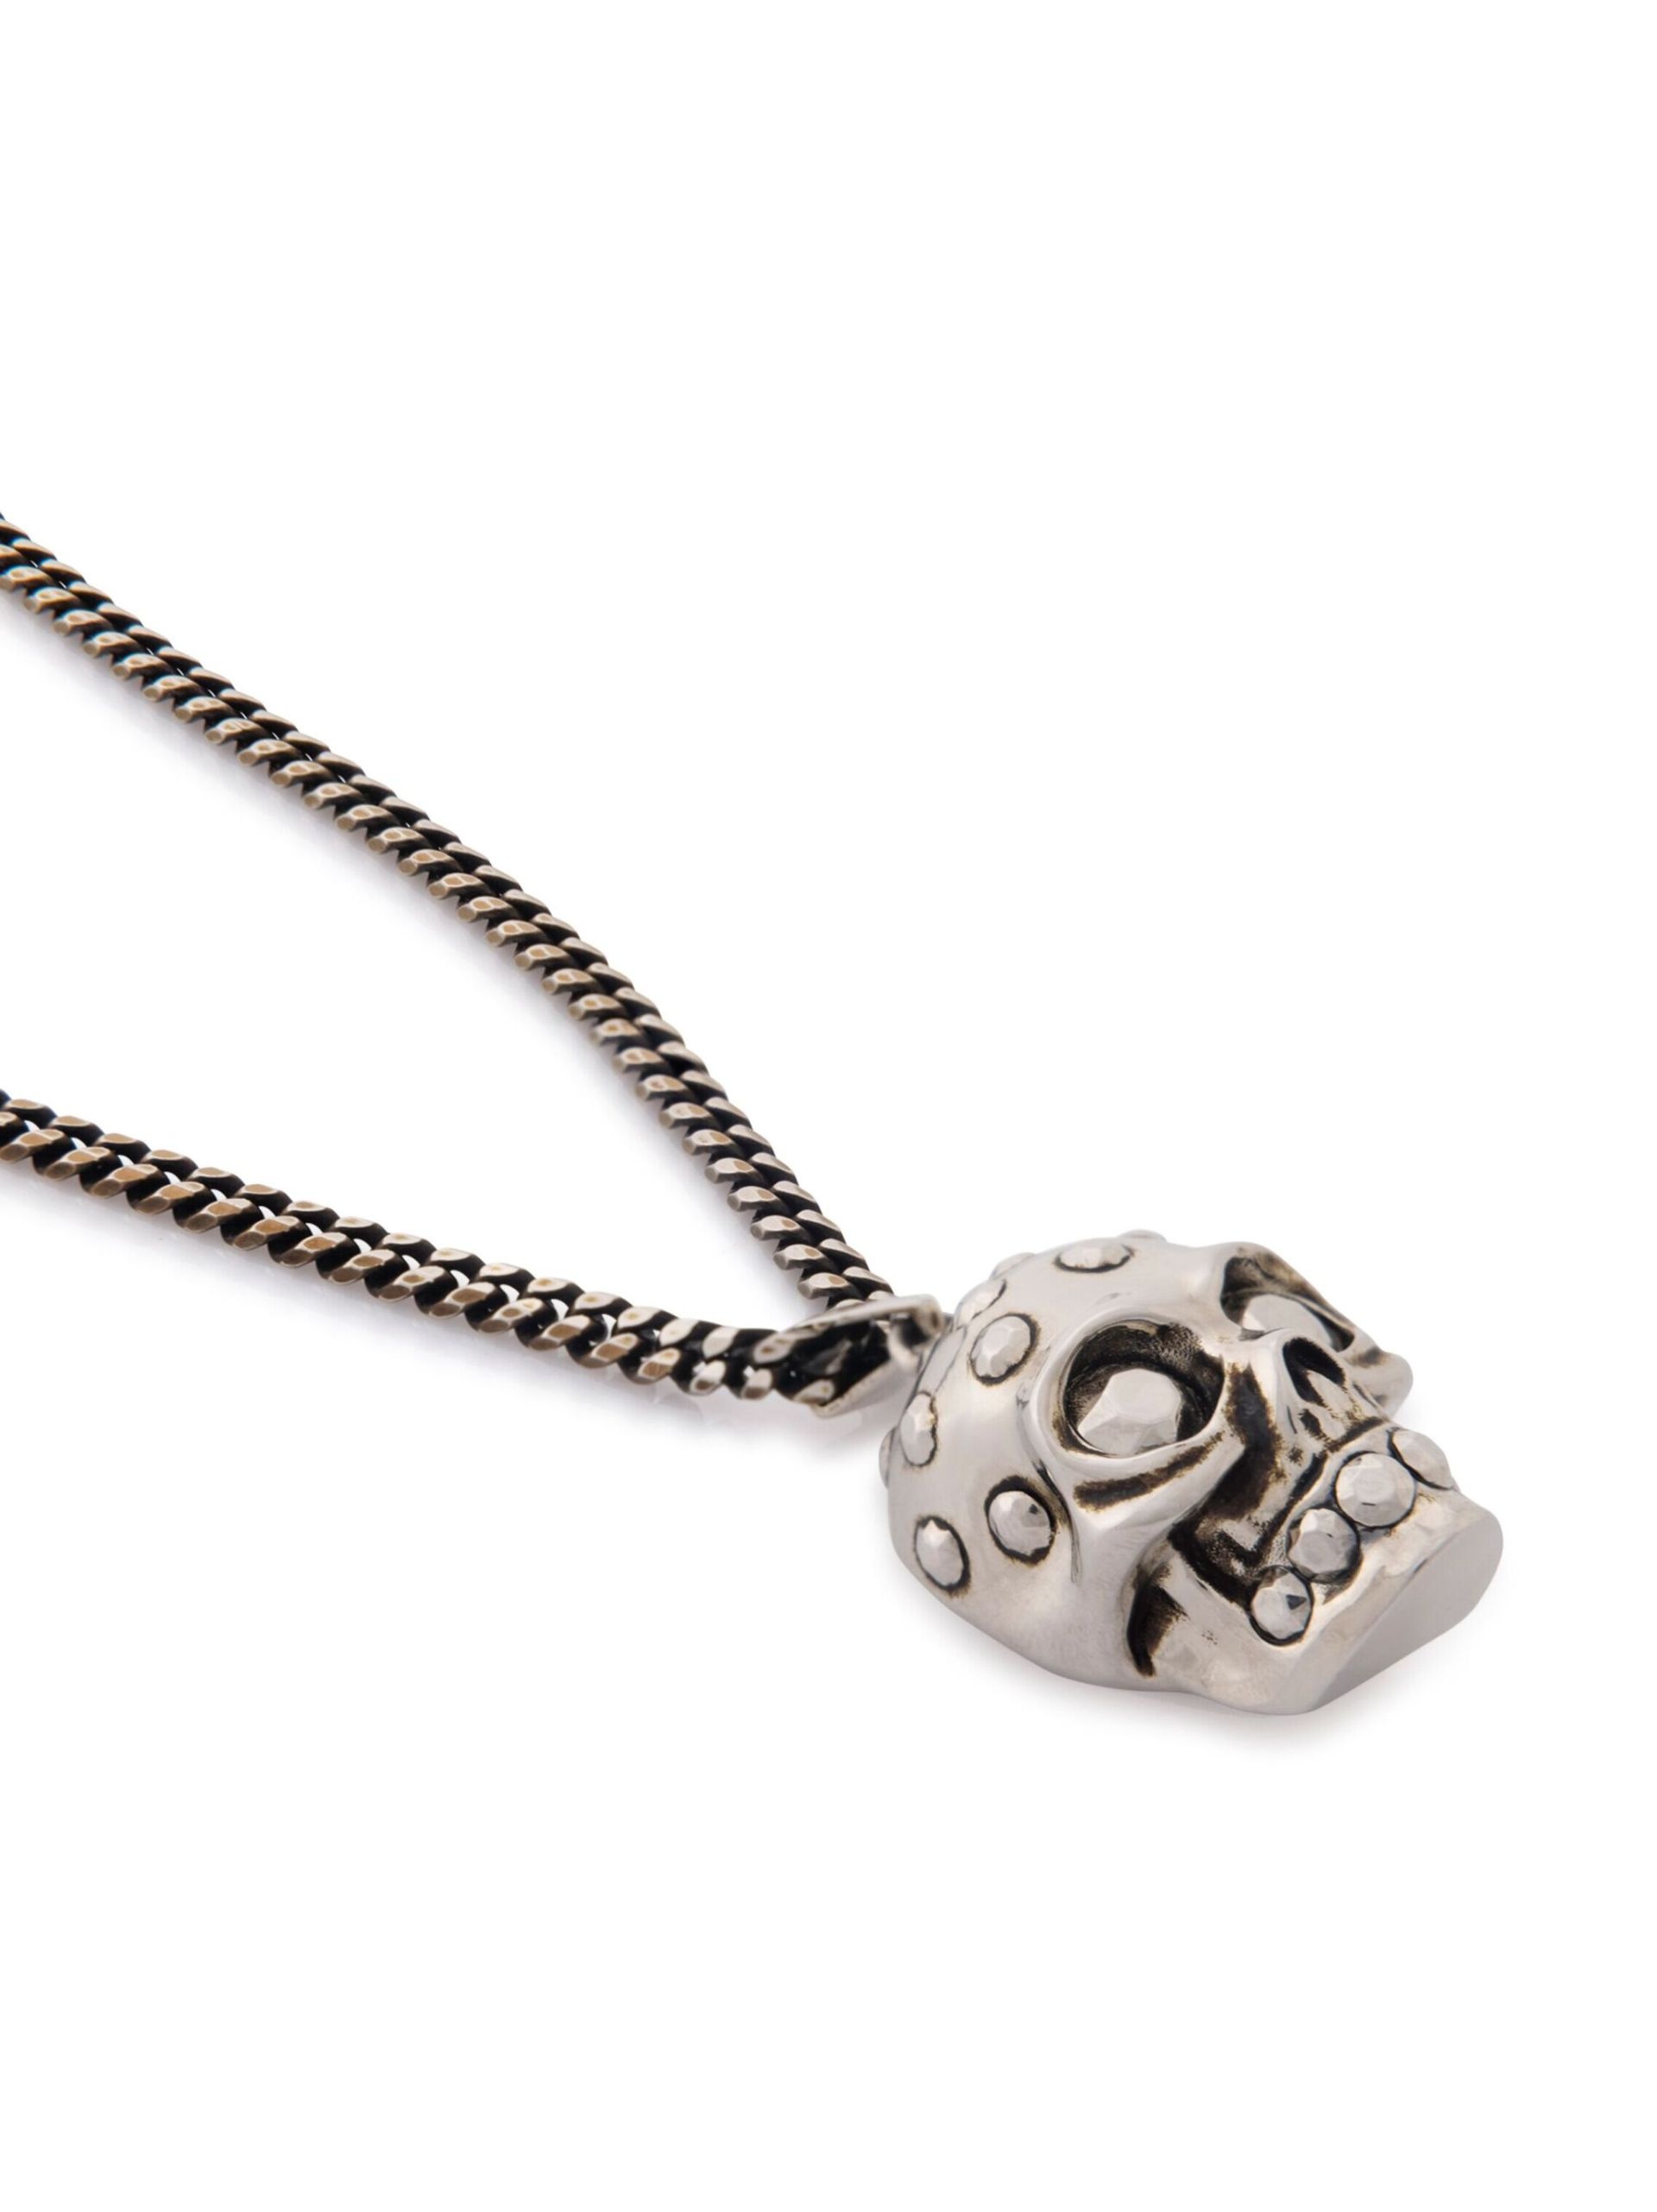 Silver-Tone The Knuckle Skull Necklace - 3